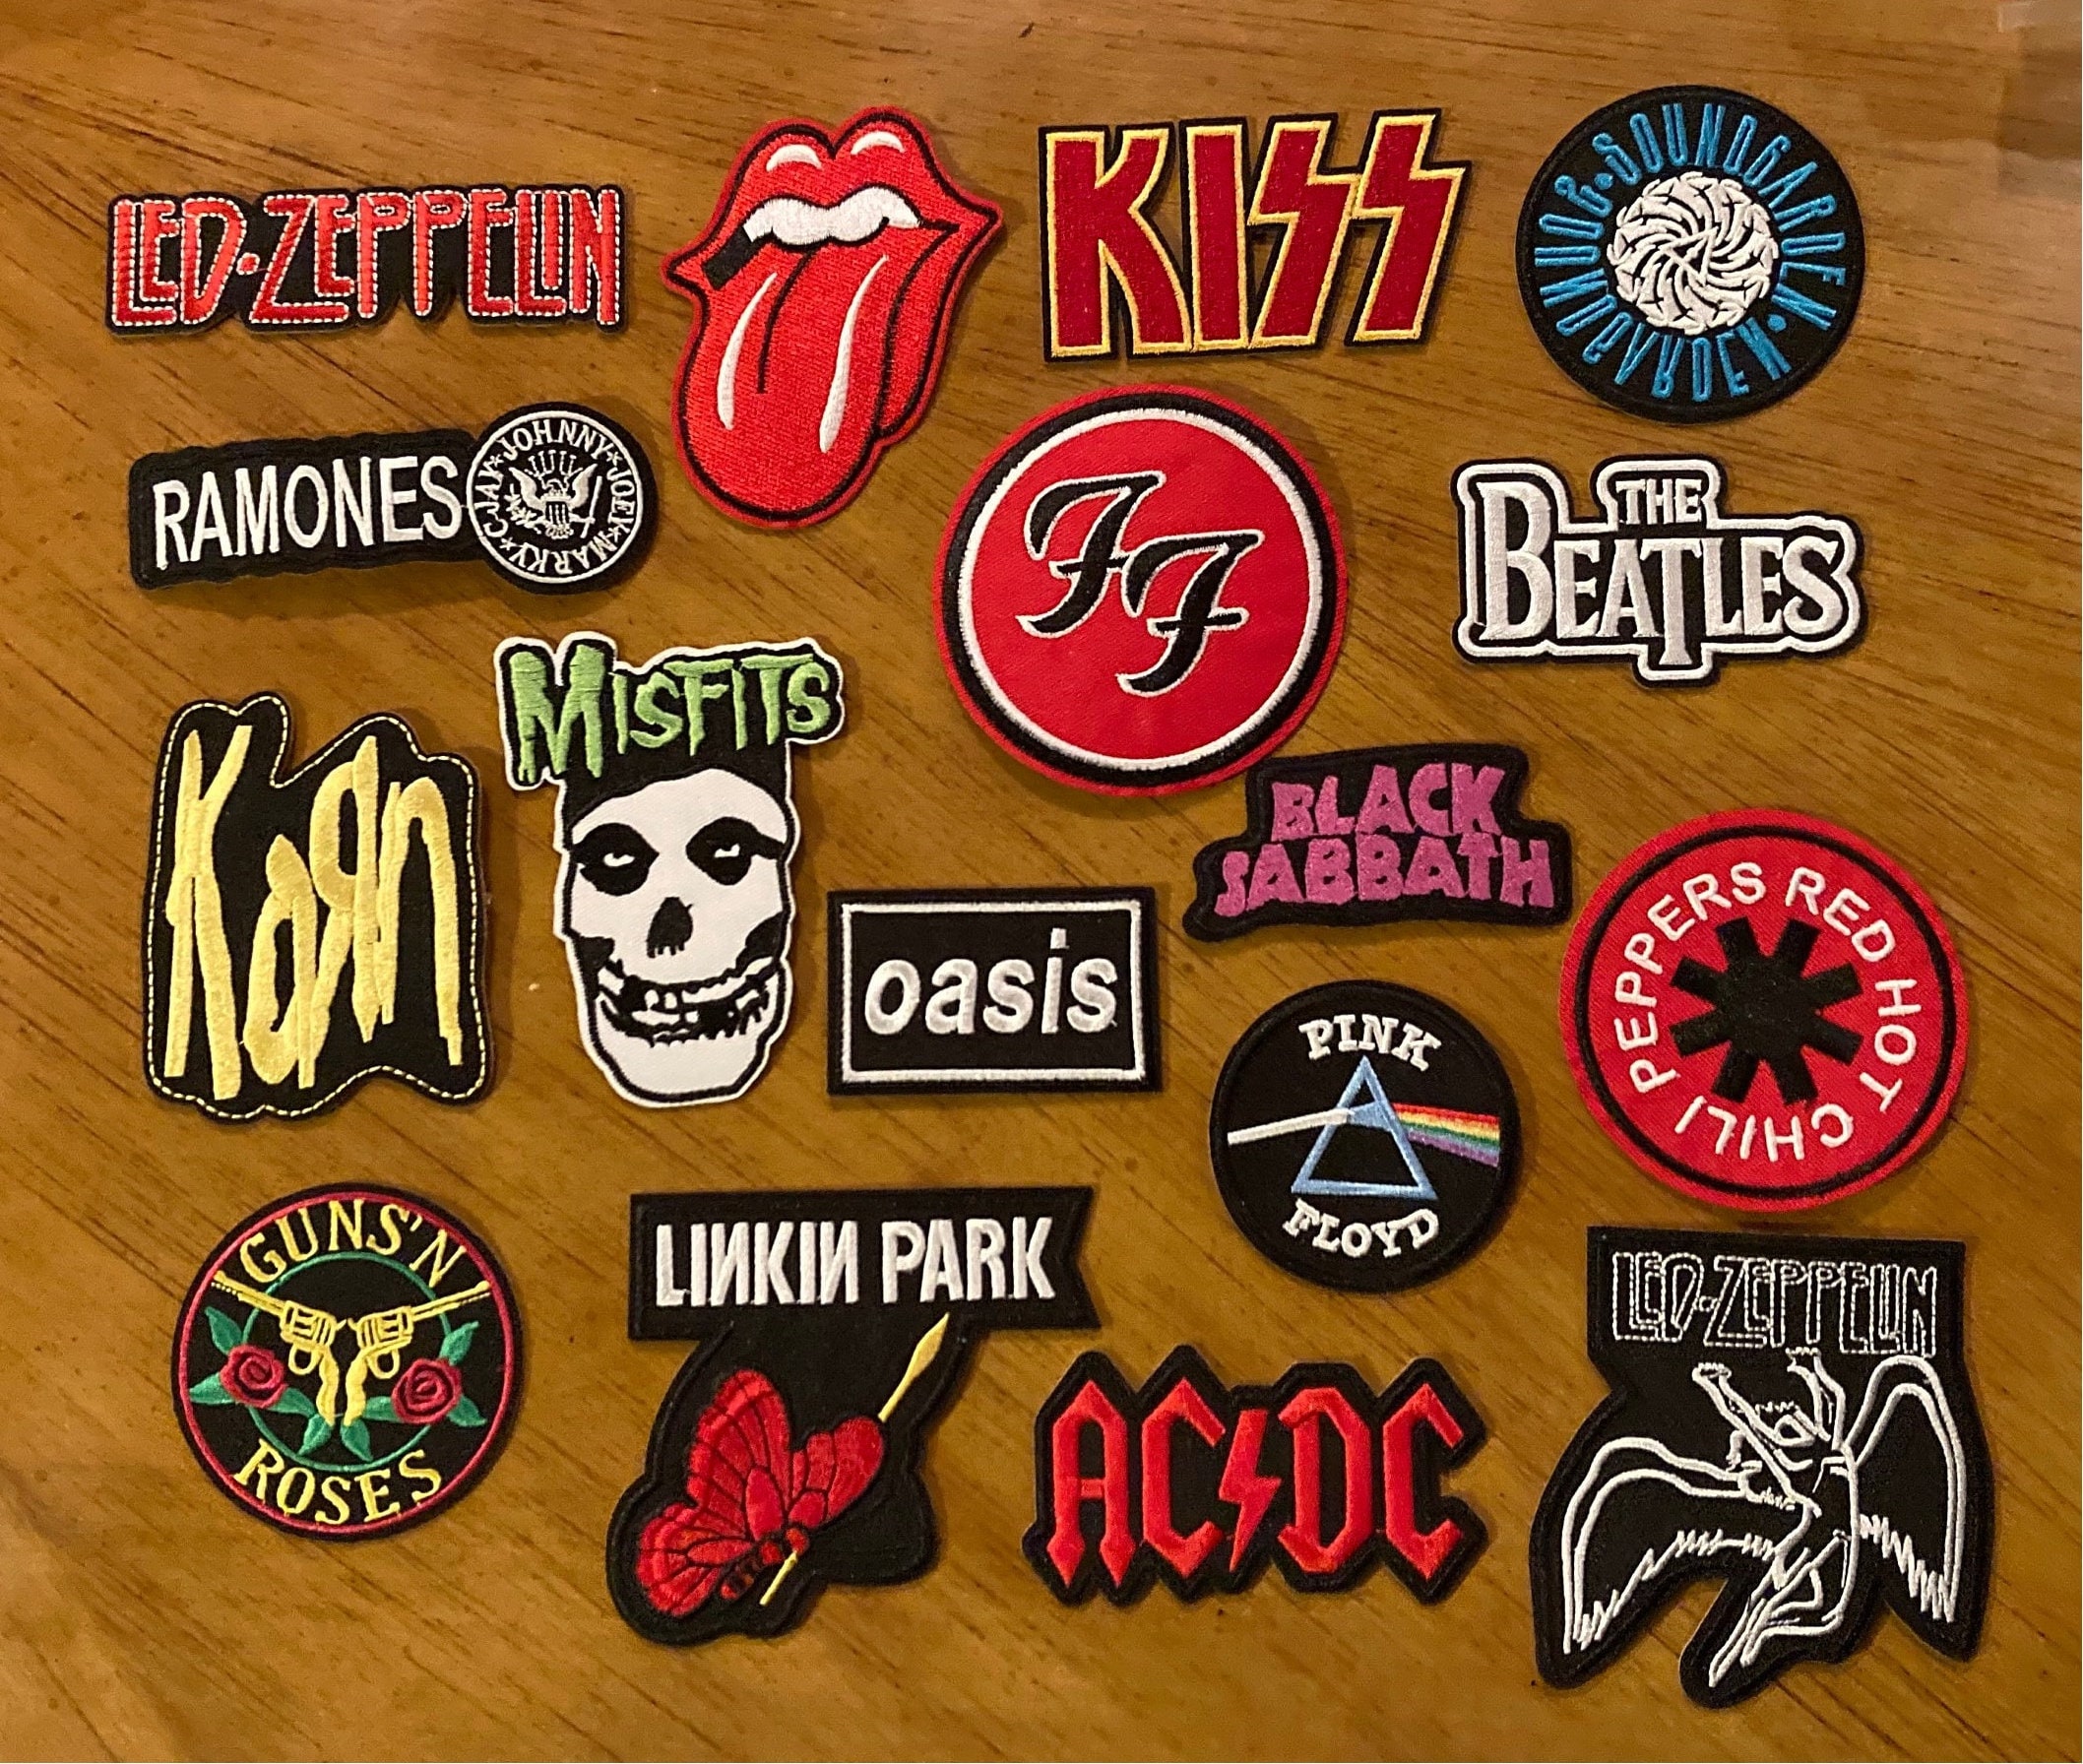 PATCHES. Band Patches. Rock and Roll Patches. Novelty. Vintage Patches.